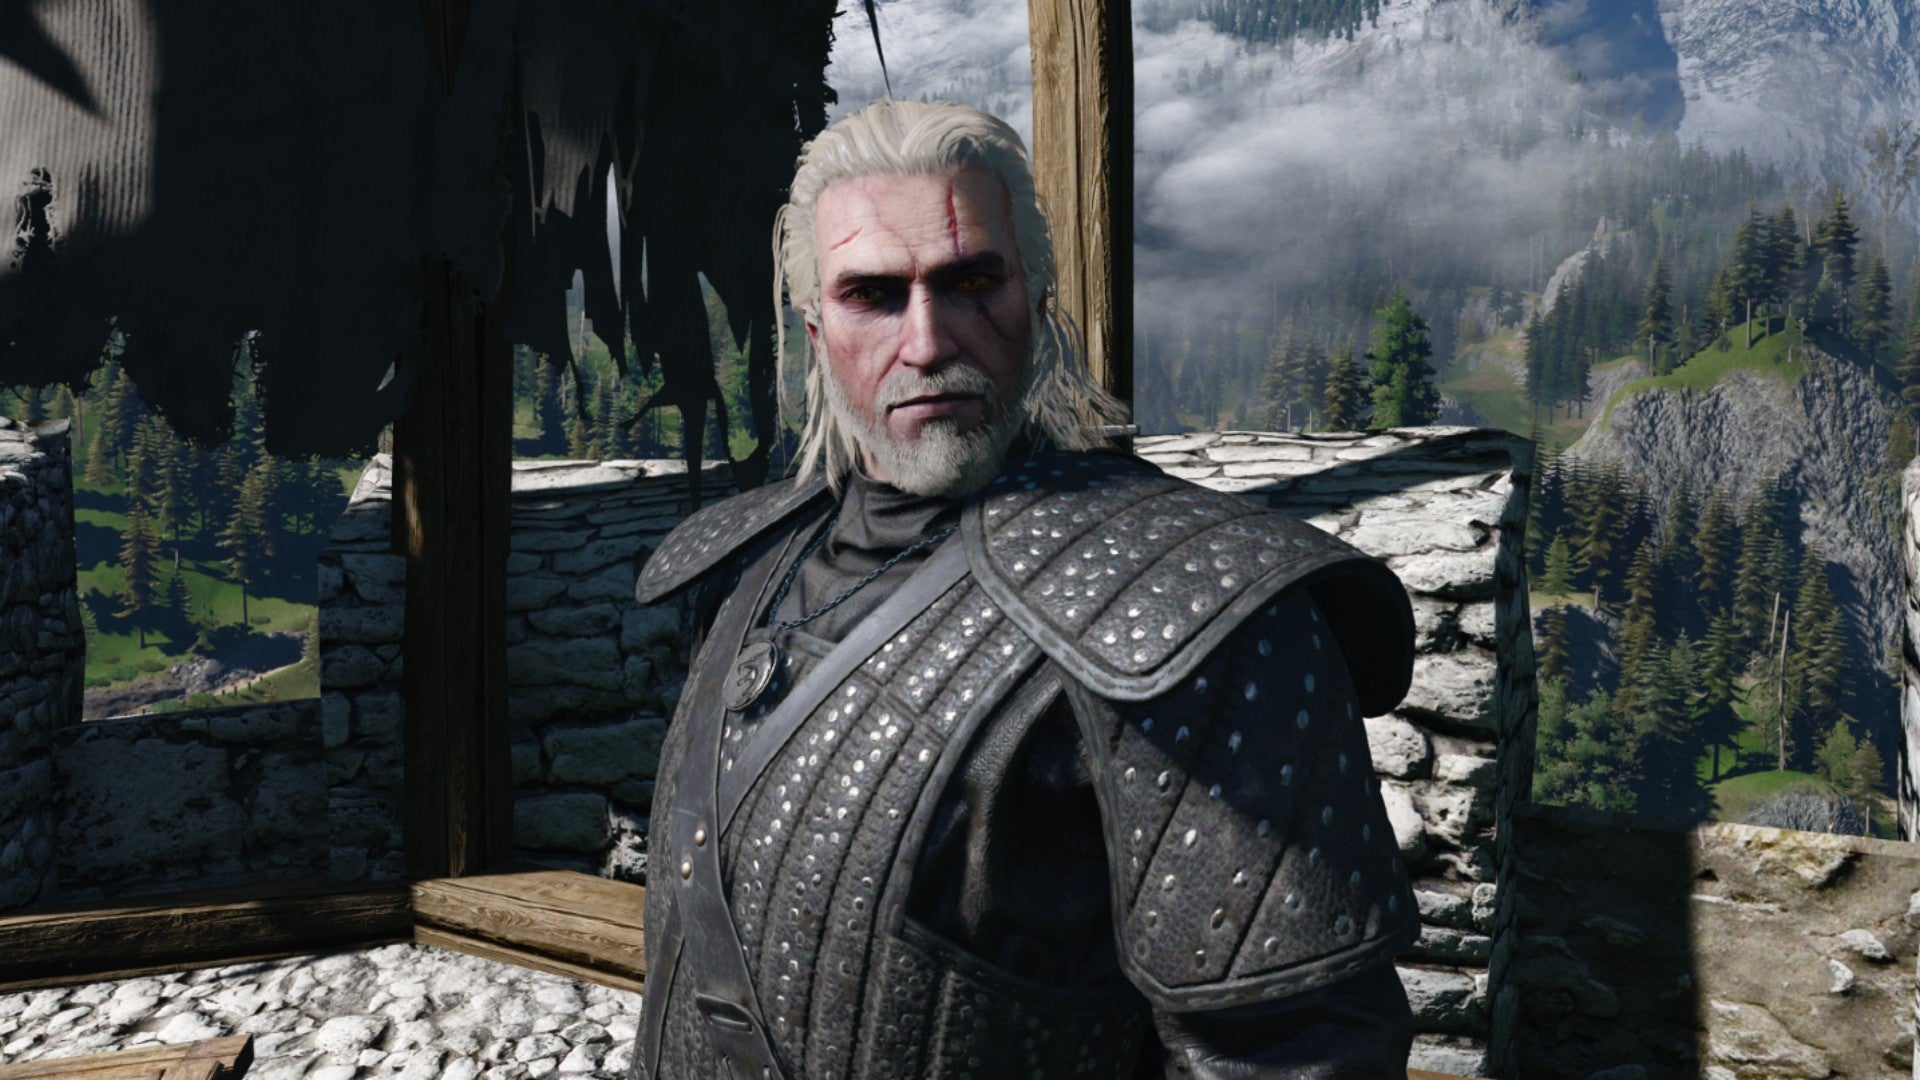 Close up image of Geralt in the Witcher 3, wearing the new Netflix armor.